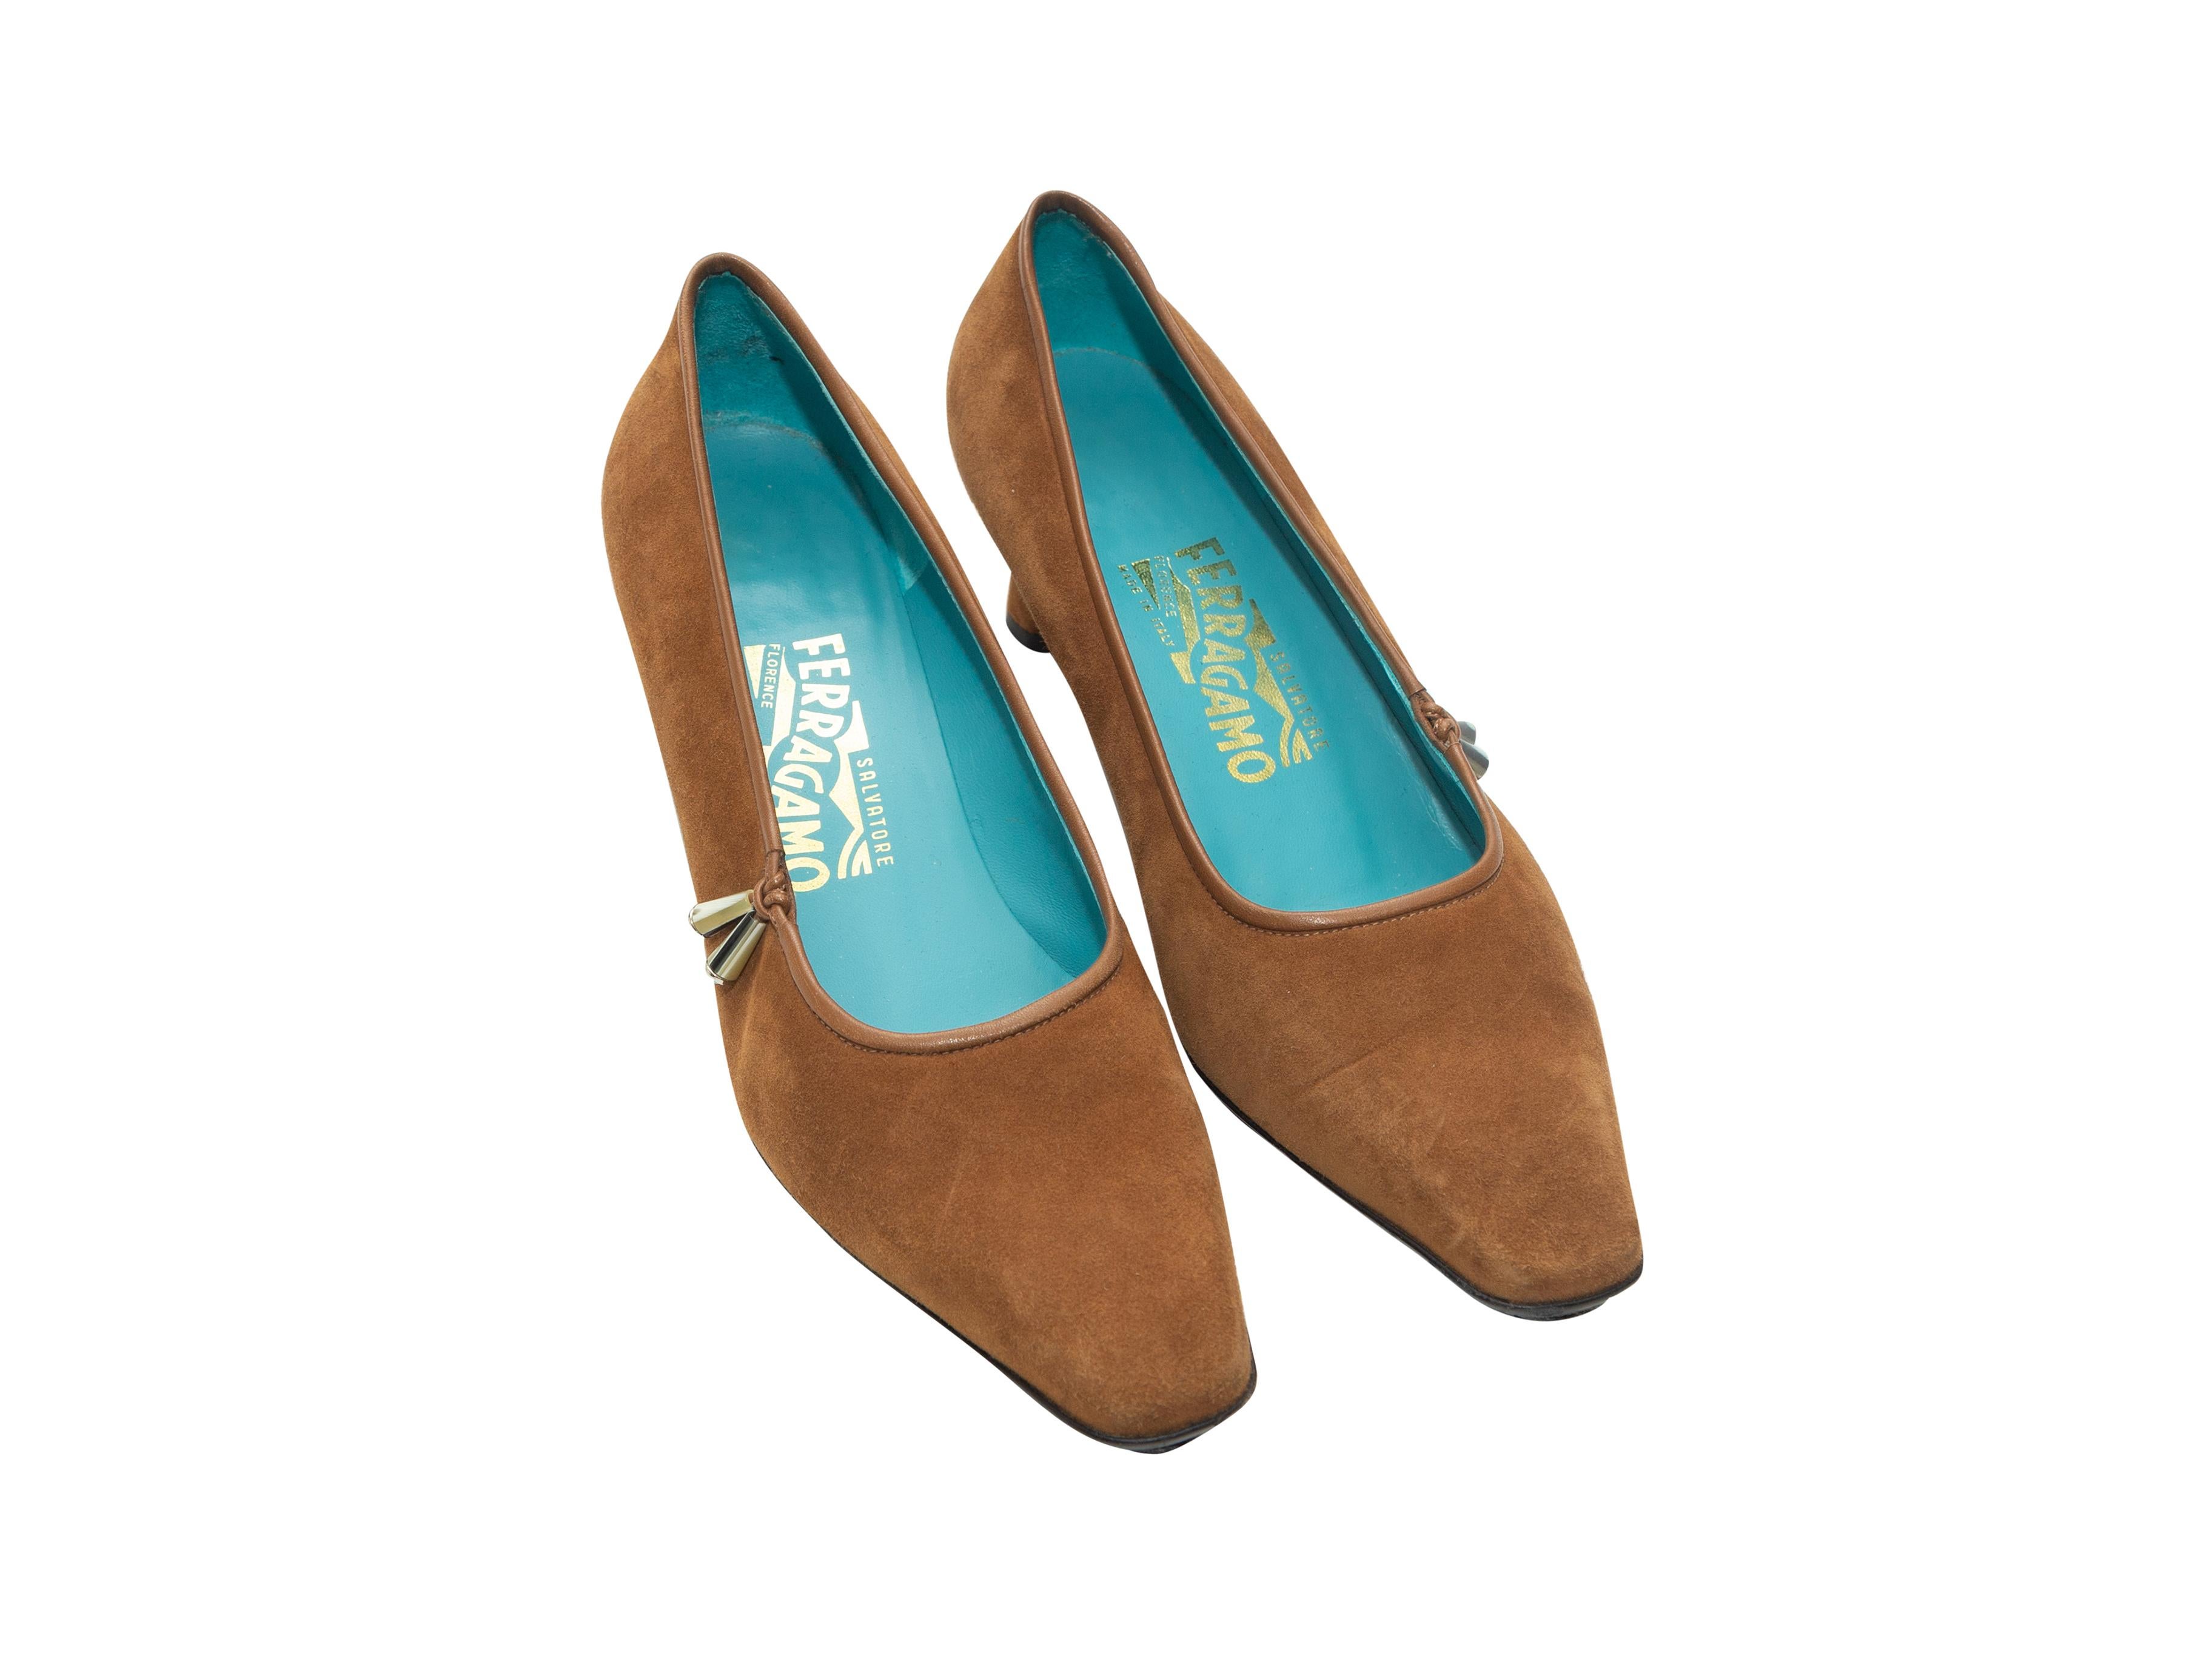 Product details: Brown suede pointed-toe pumps by Salvatore Ferragamo. Silver-tone and blue bead accents at sides. Kitten heels. 2